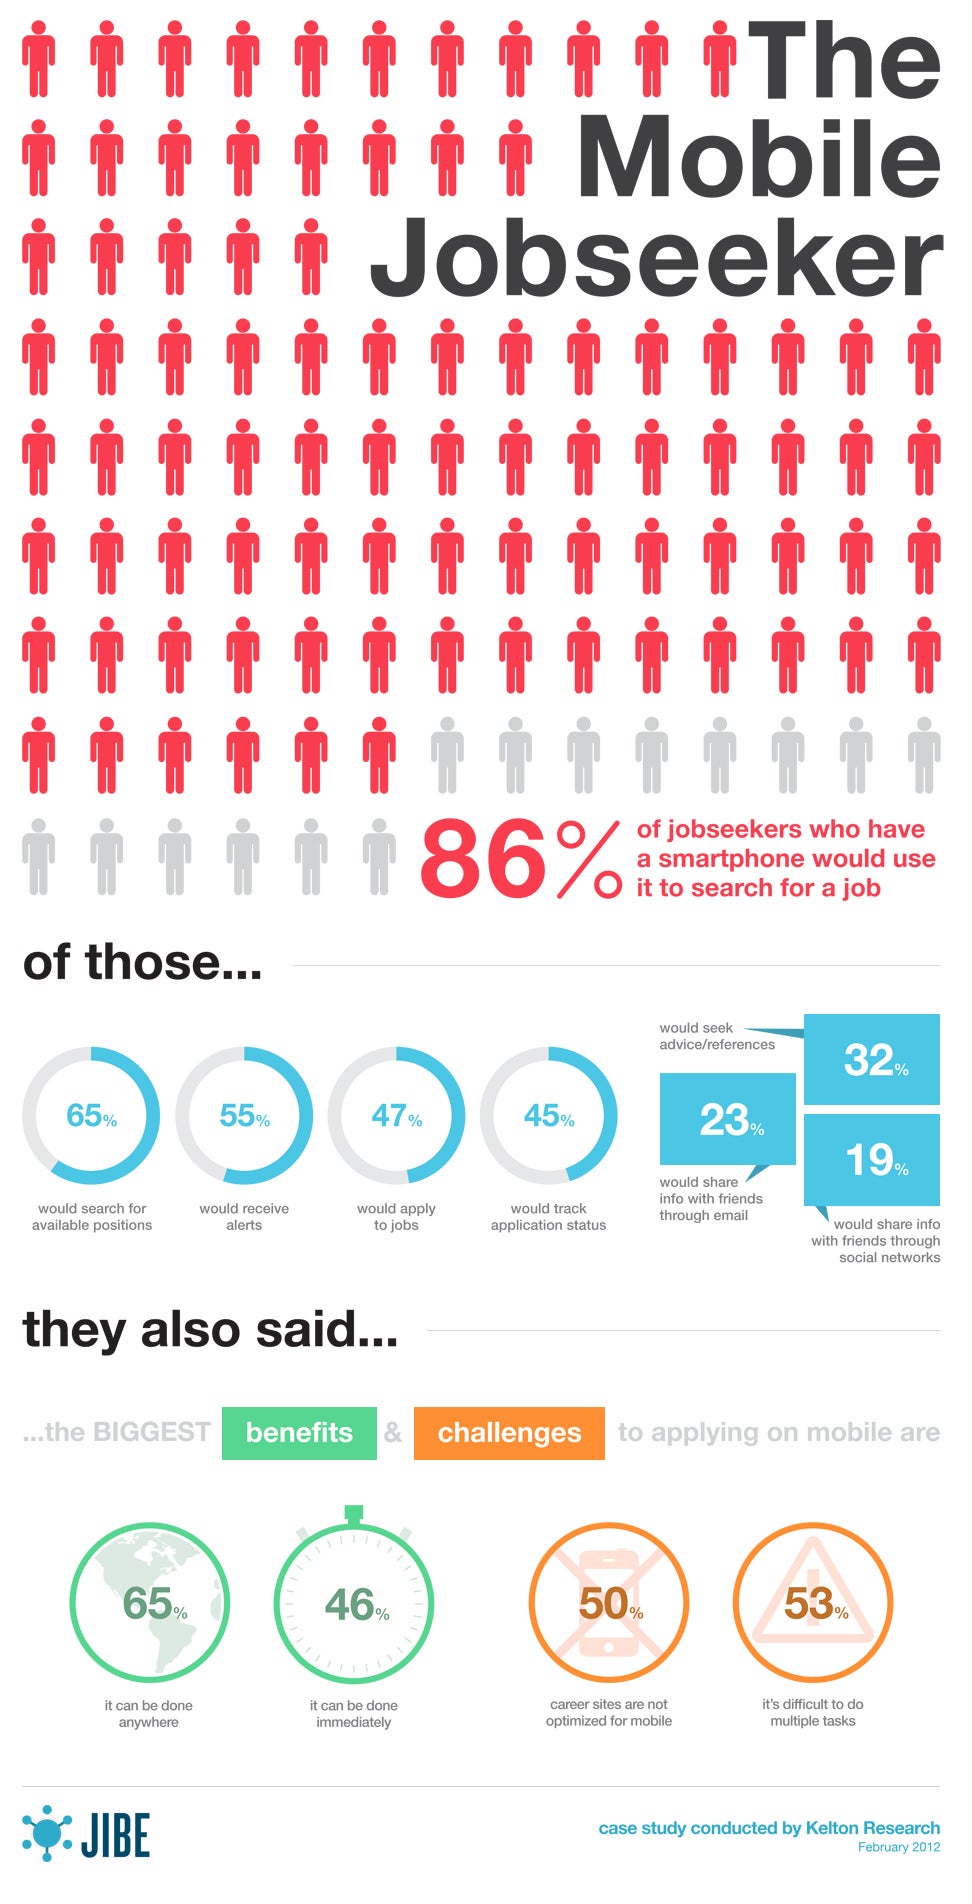 More jobseekers are going mobile [infographic]